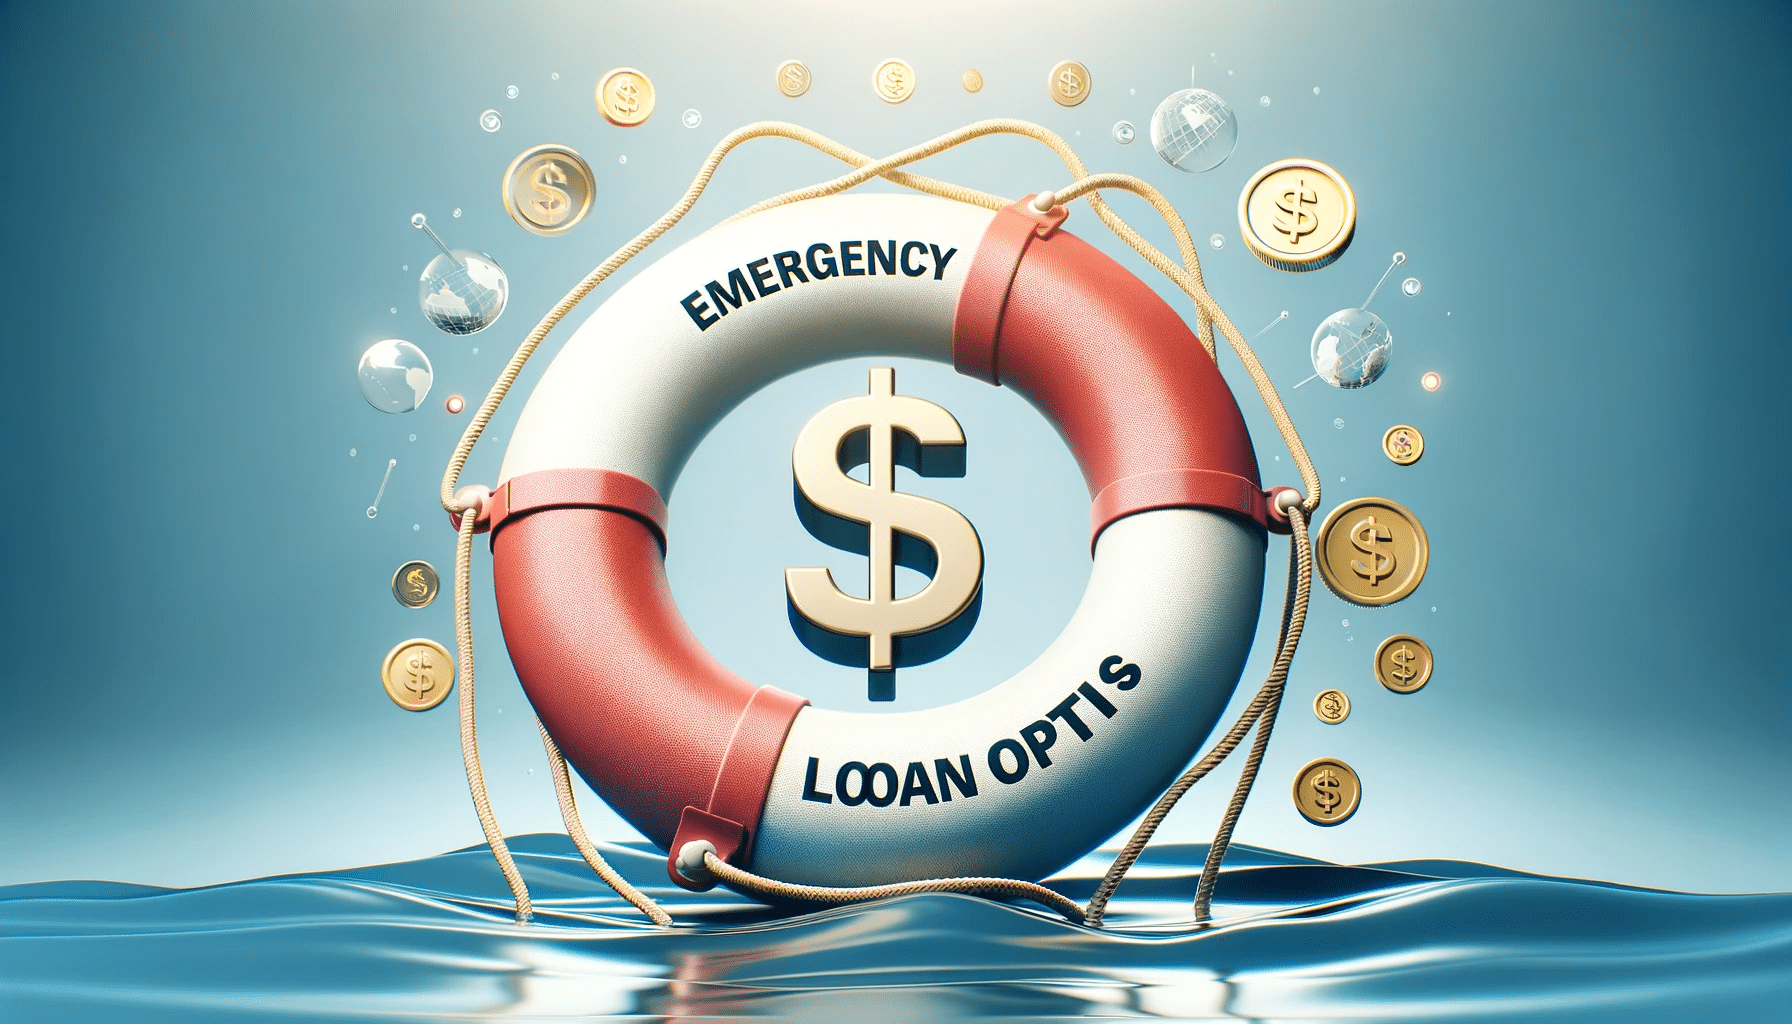 Emergency loan options for unexpected expenses